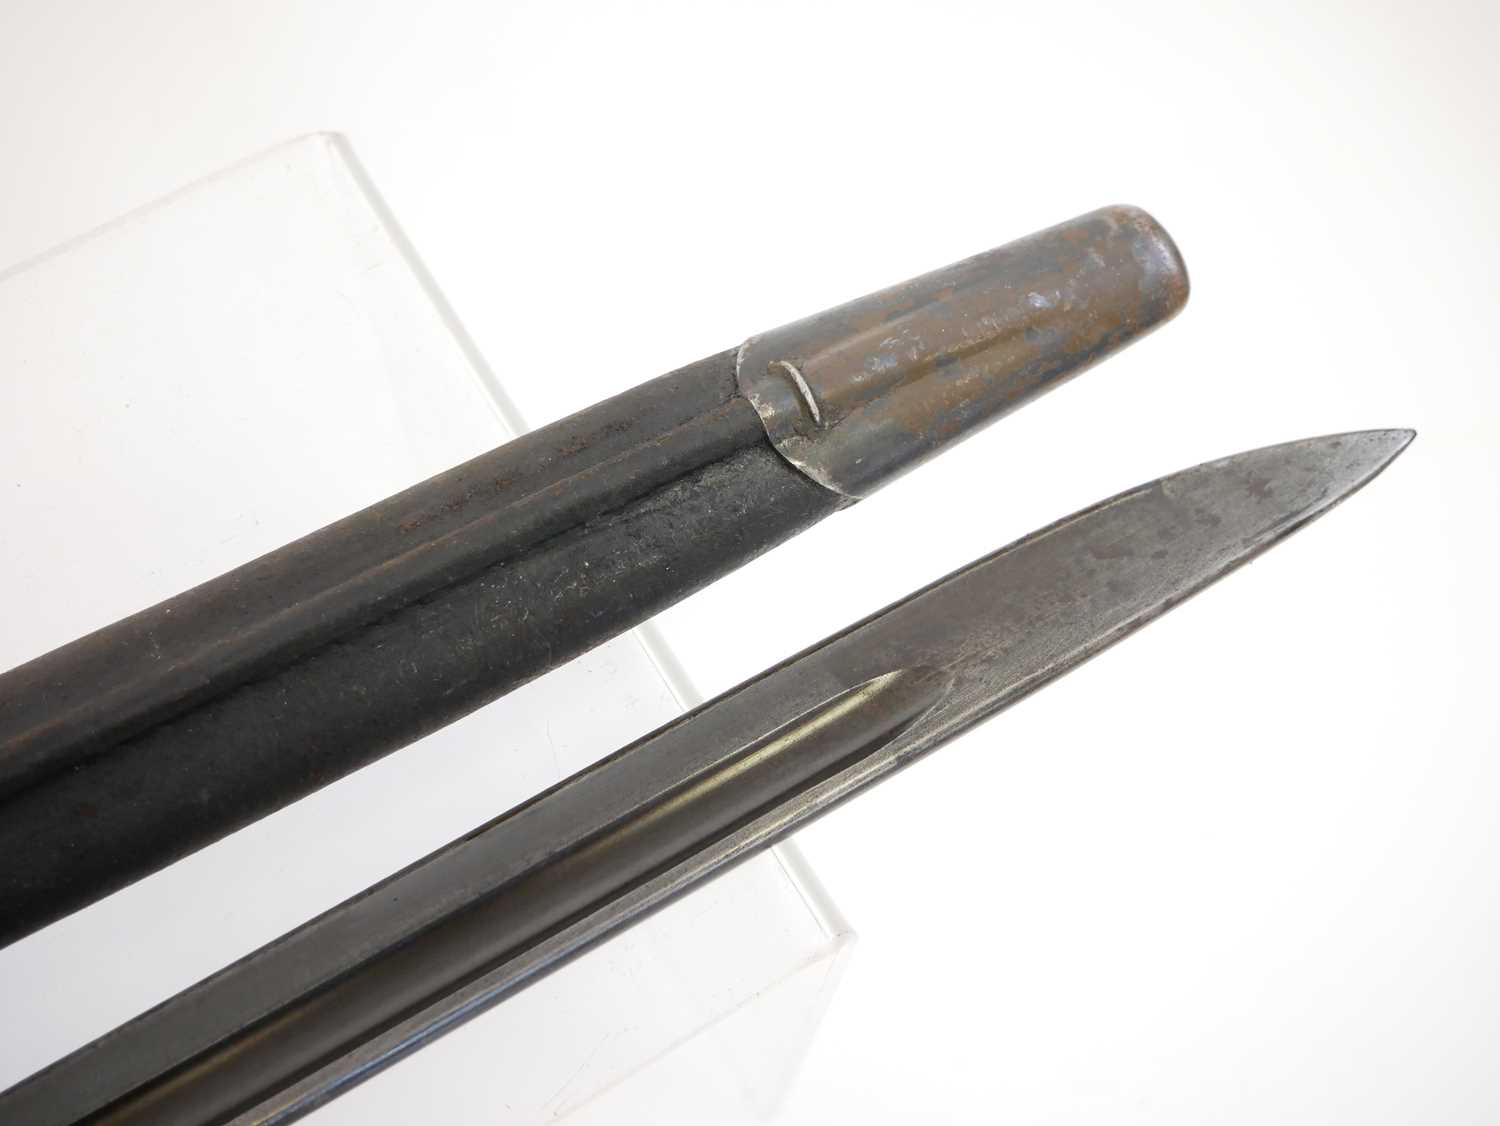 Lee Enfield SMLE 1907 pattern sword bayonet and scabbard, by Chapman, the ricasso stamped with 2' 17 - Image 8 of 9